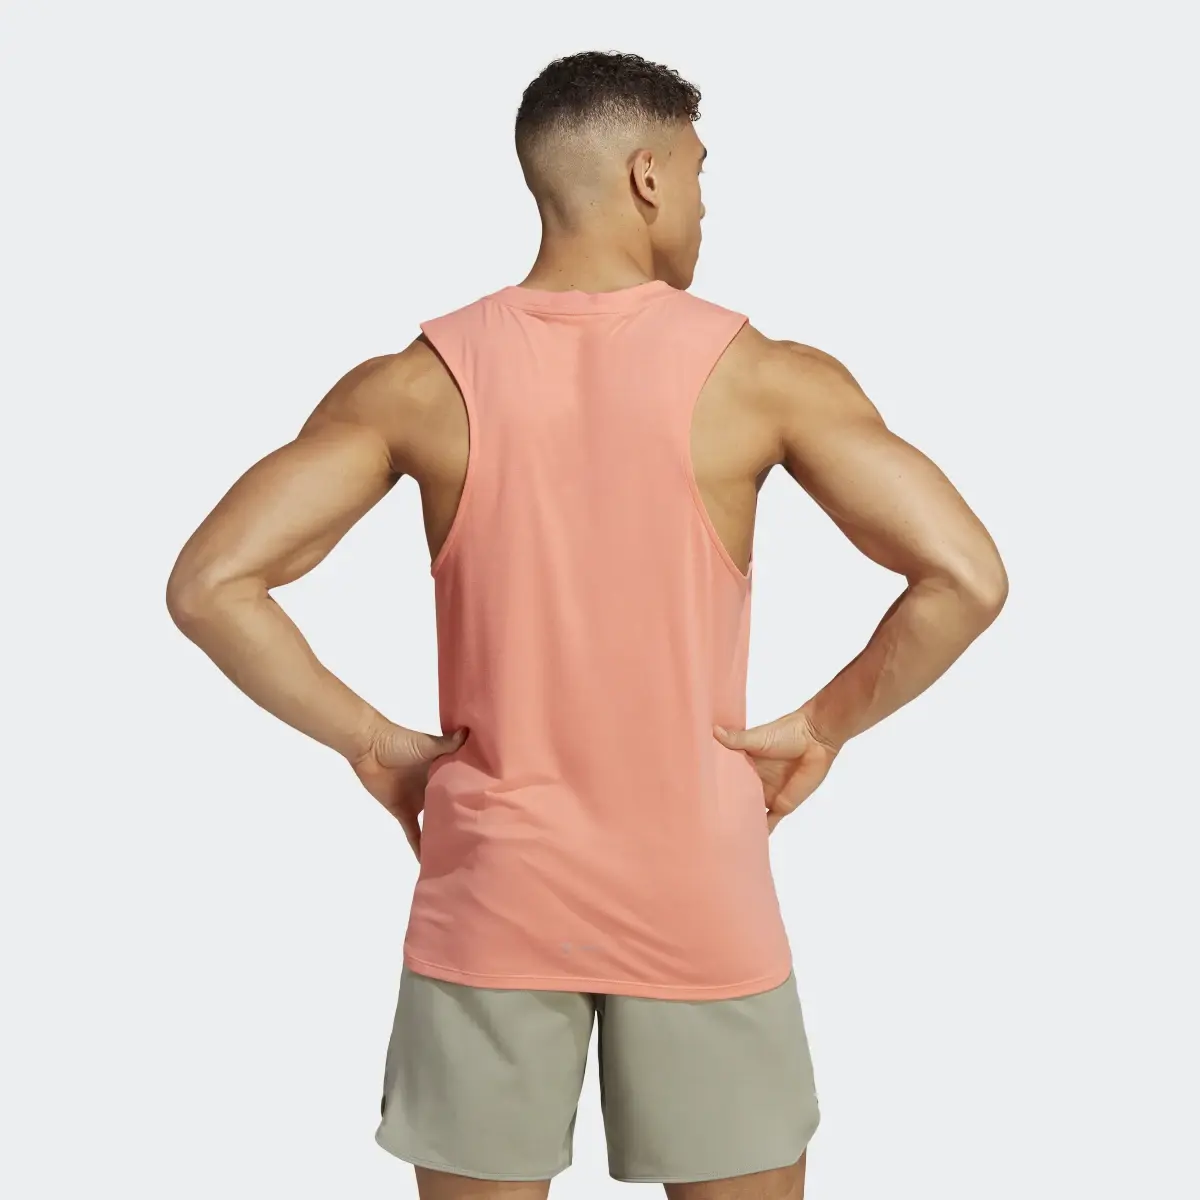 Adidas Designed for Training Workout Tank Top. 3